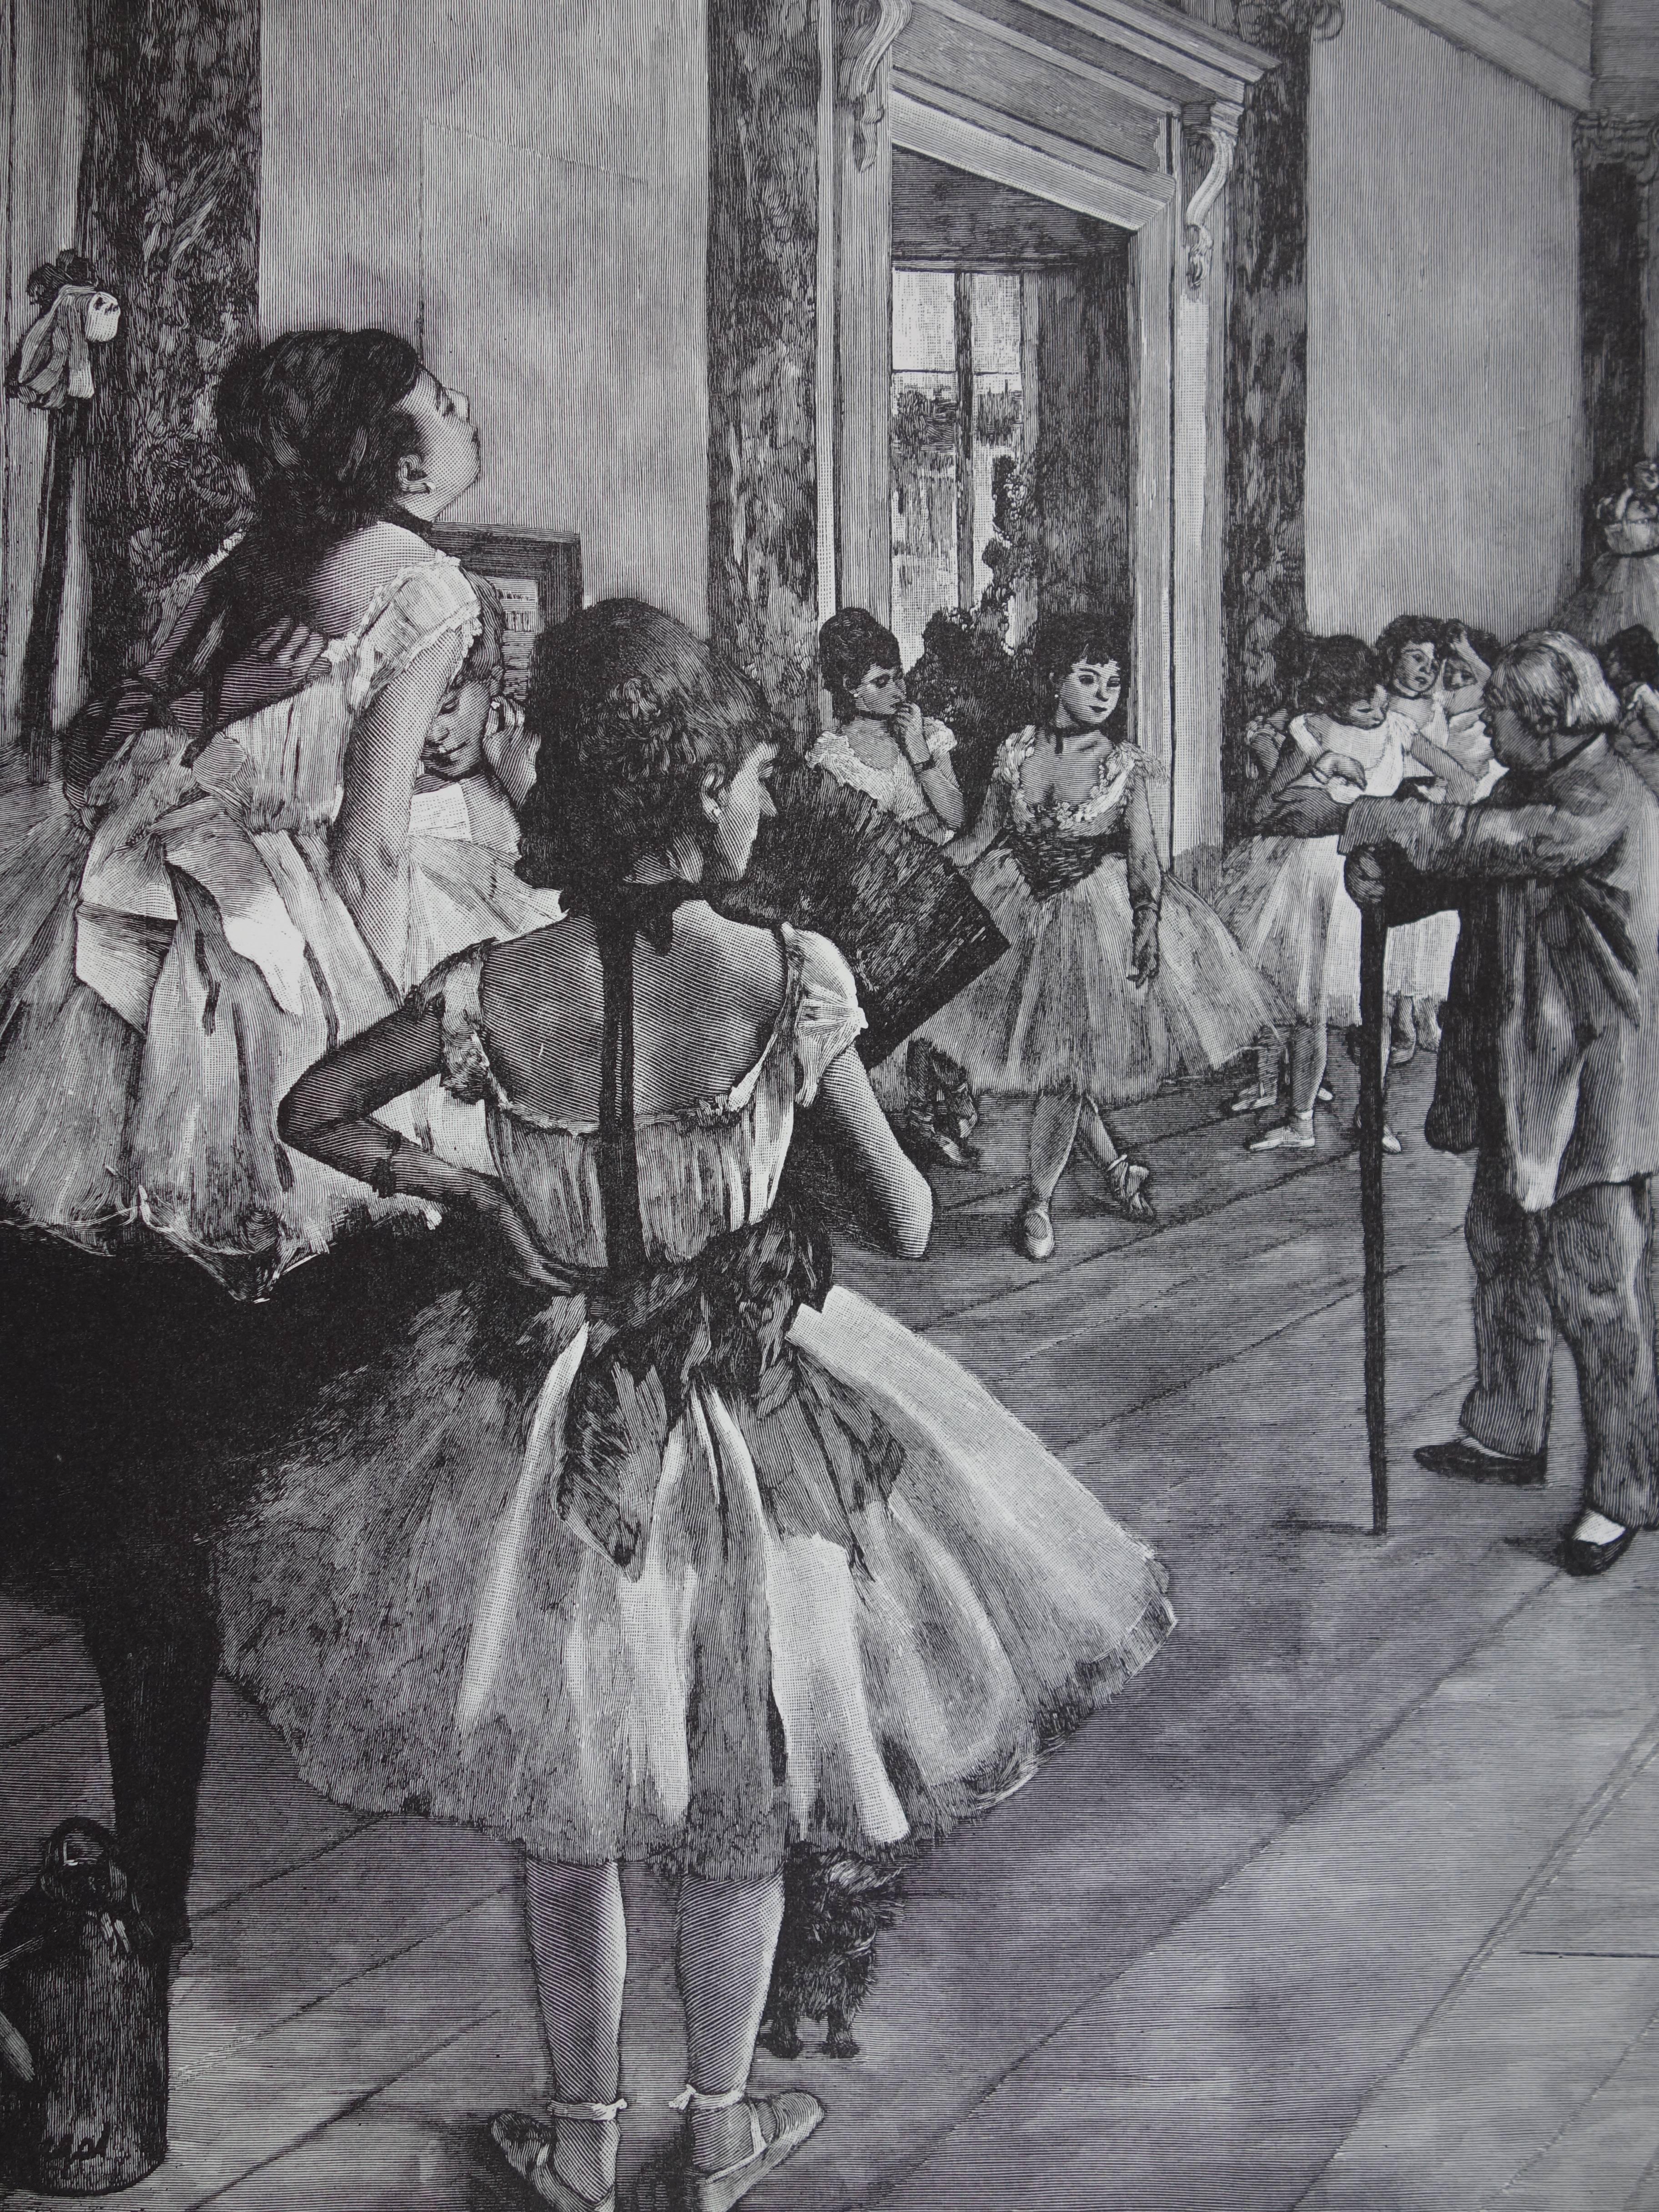 degas at the louvre